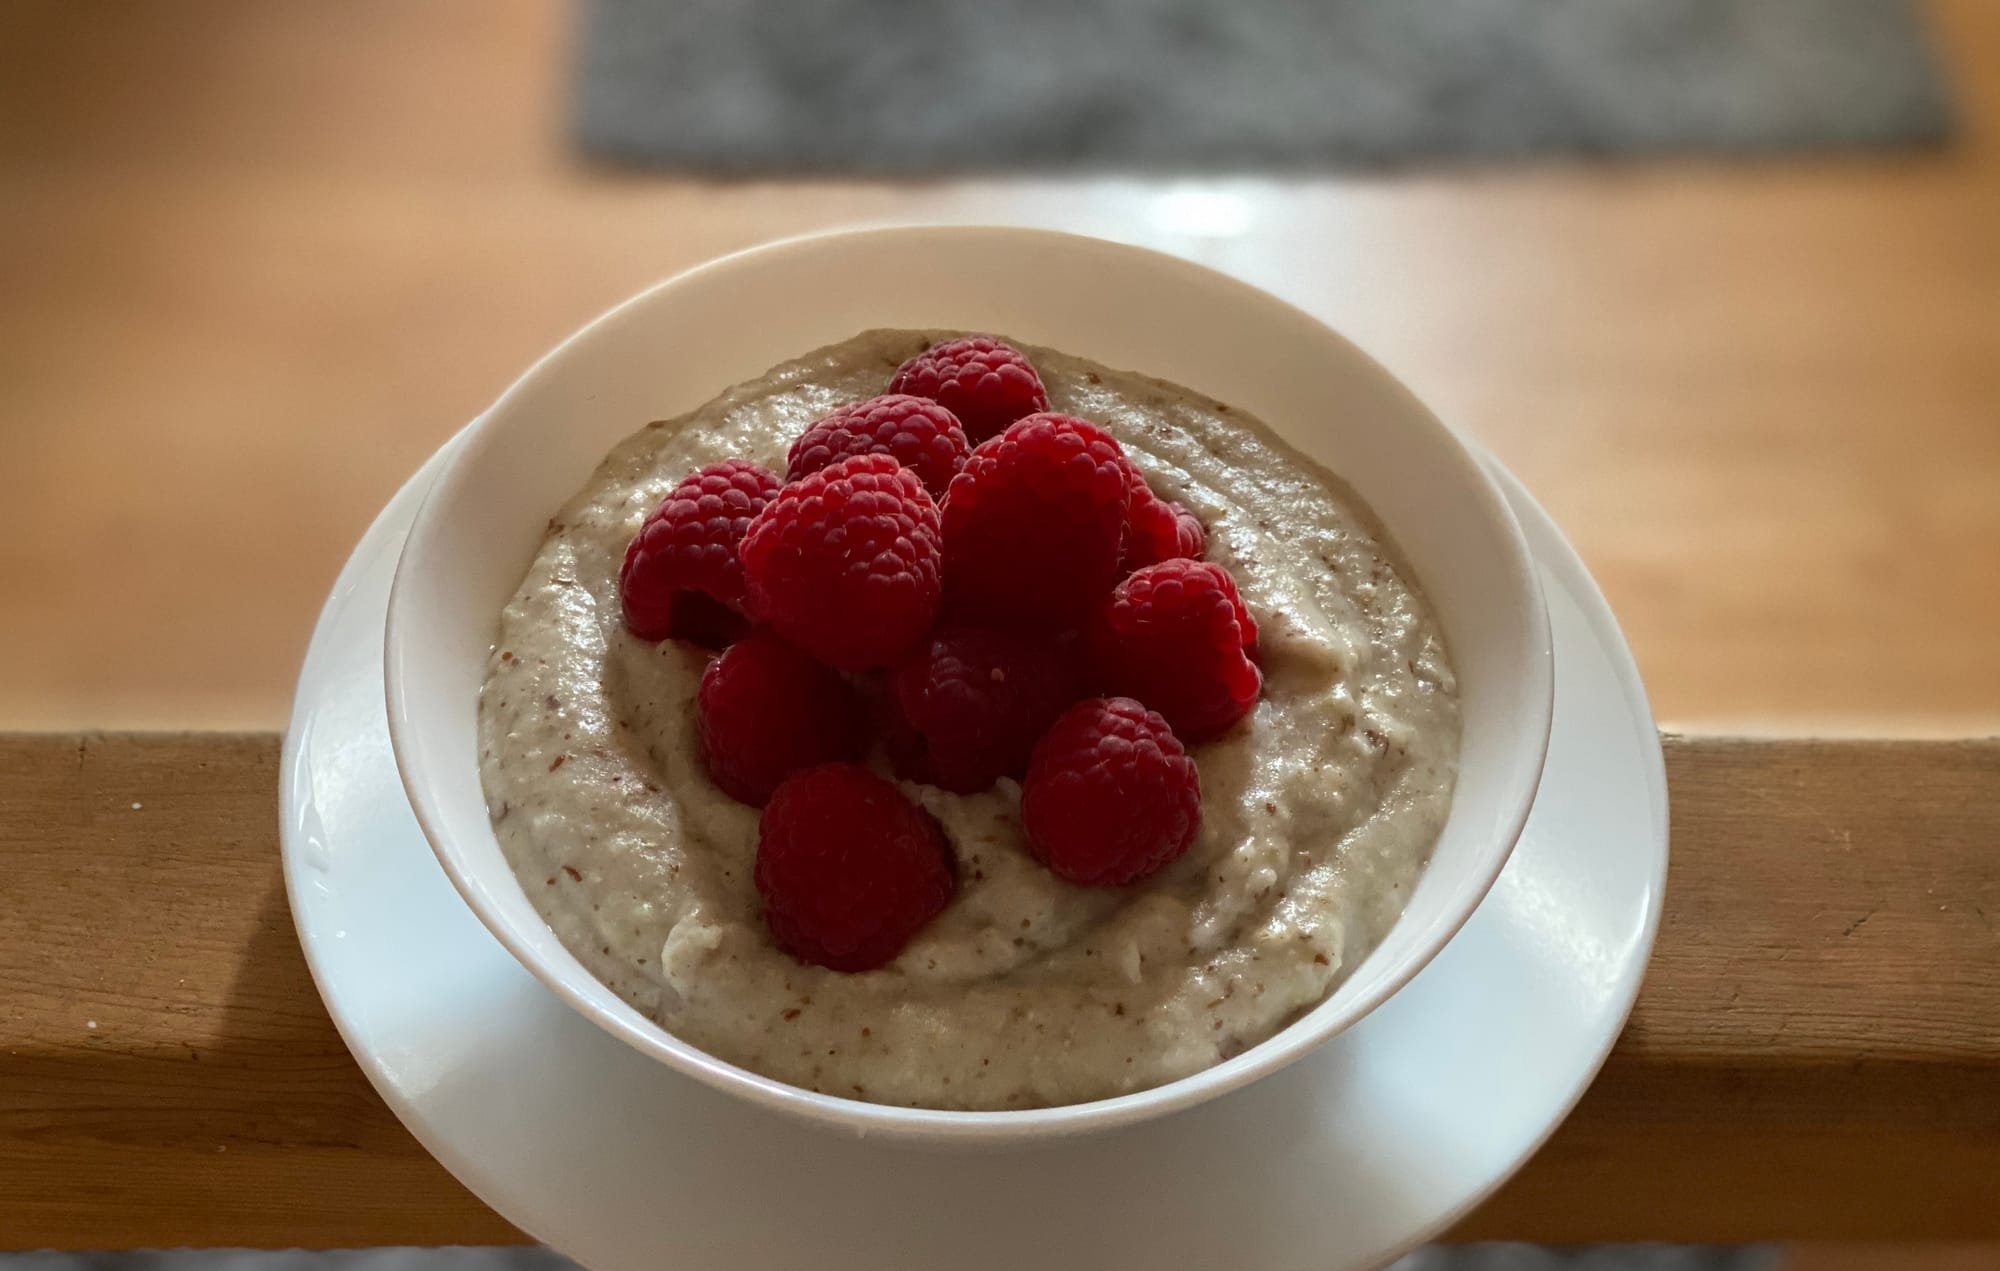 Porridge is one of the best functional breakfasts for athletes, but why?